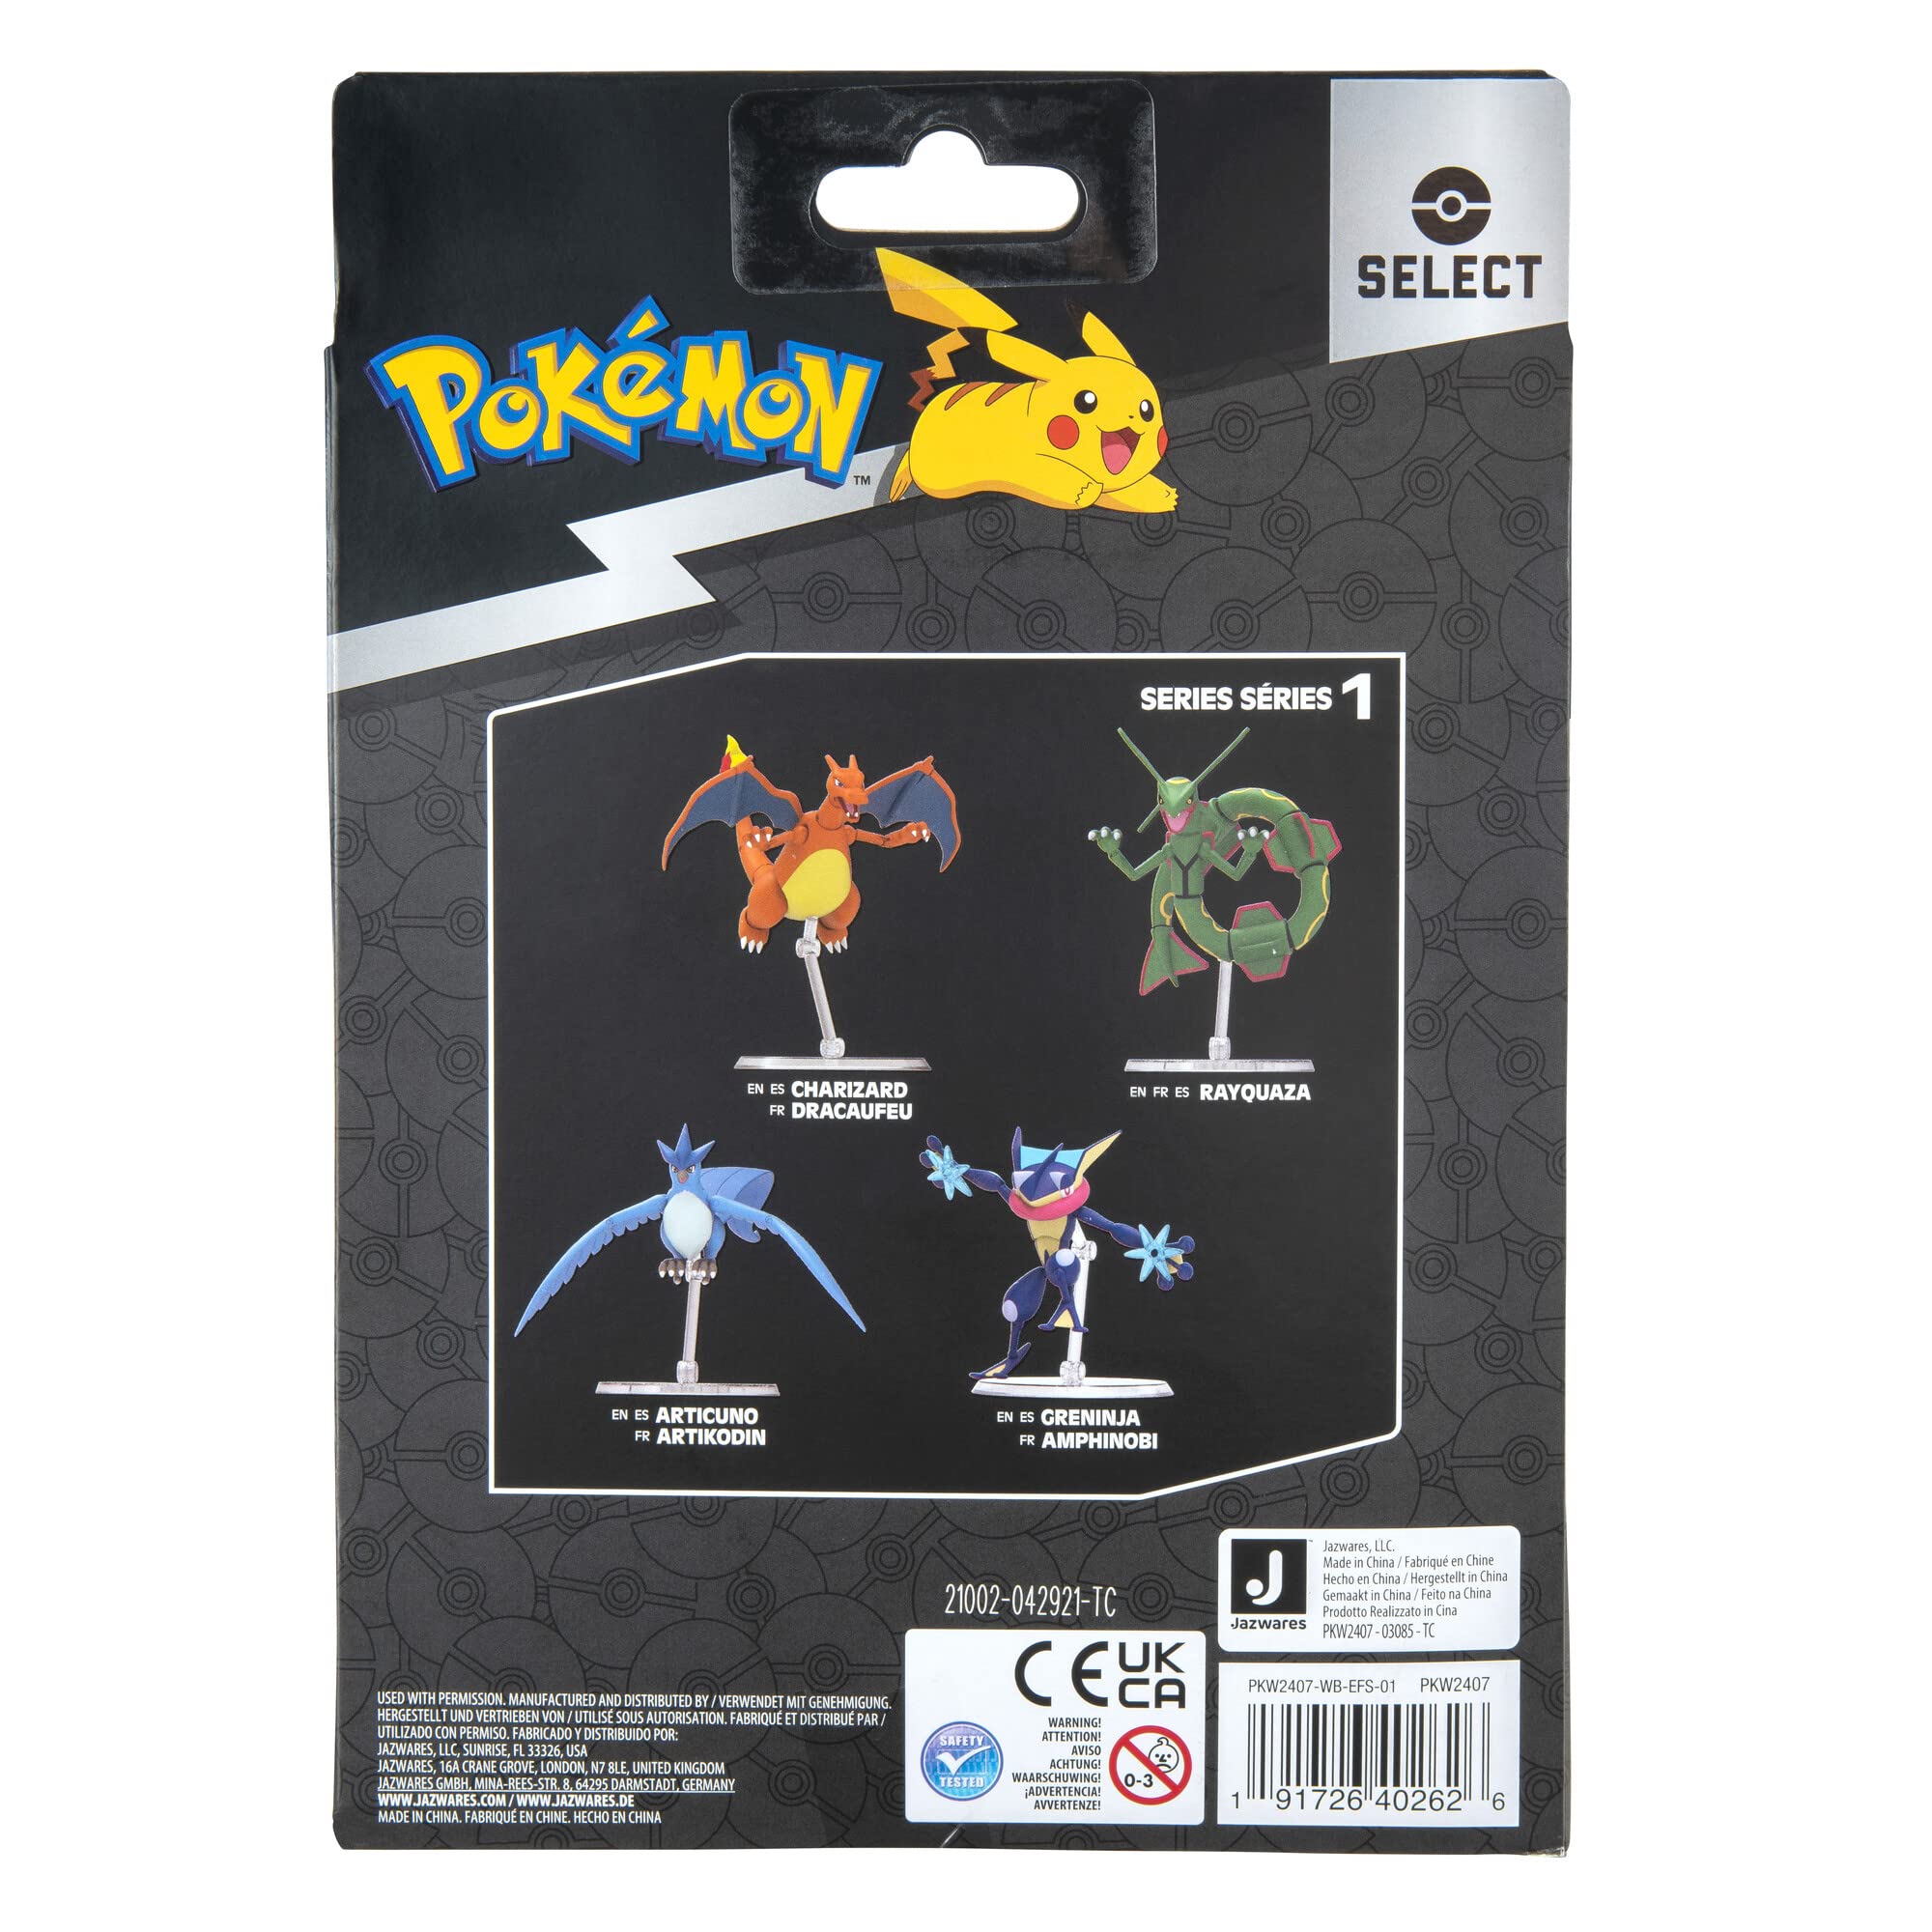 Pokemon Charizard, Super-Articulated 6-Inch Figure - Collect Your Favorite Figures - Toys for Kids and Pokémon Fans